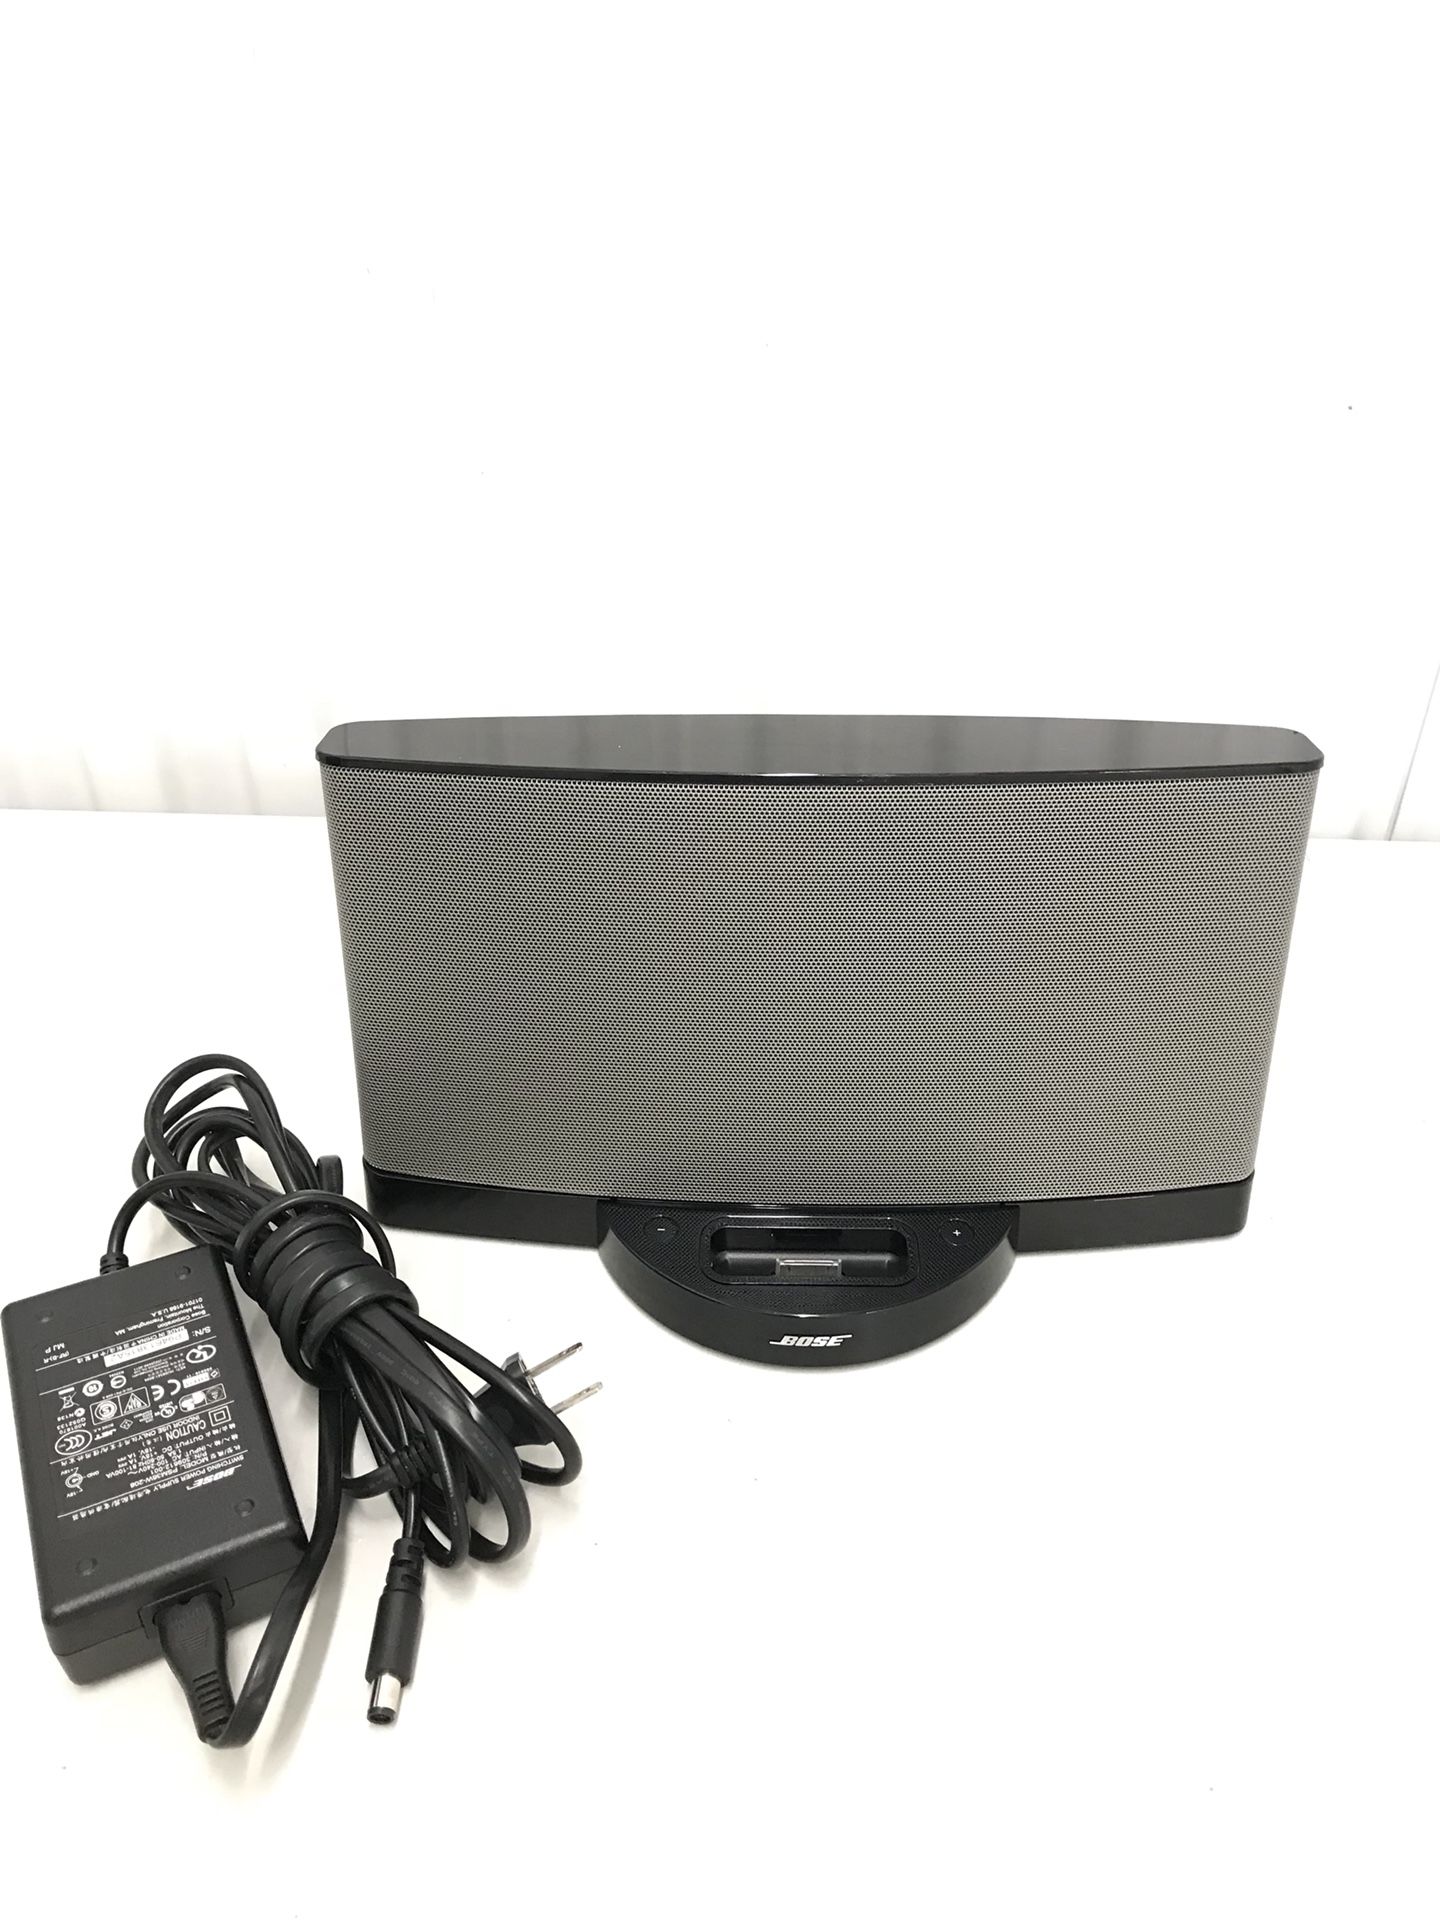 BOSE SoundDock Series II Music System iPod/iPhone Dock with Power Supply ($60 Firm)